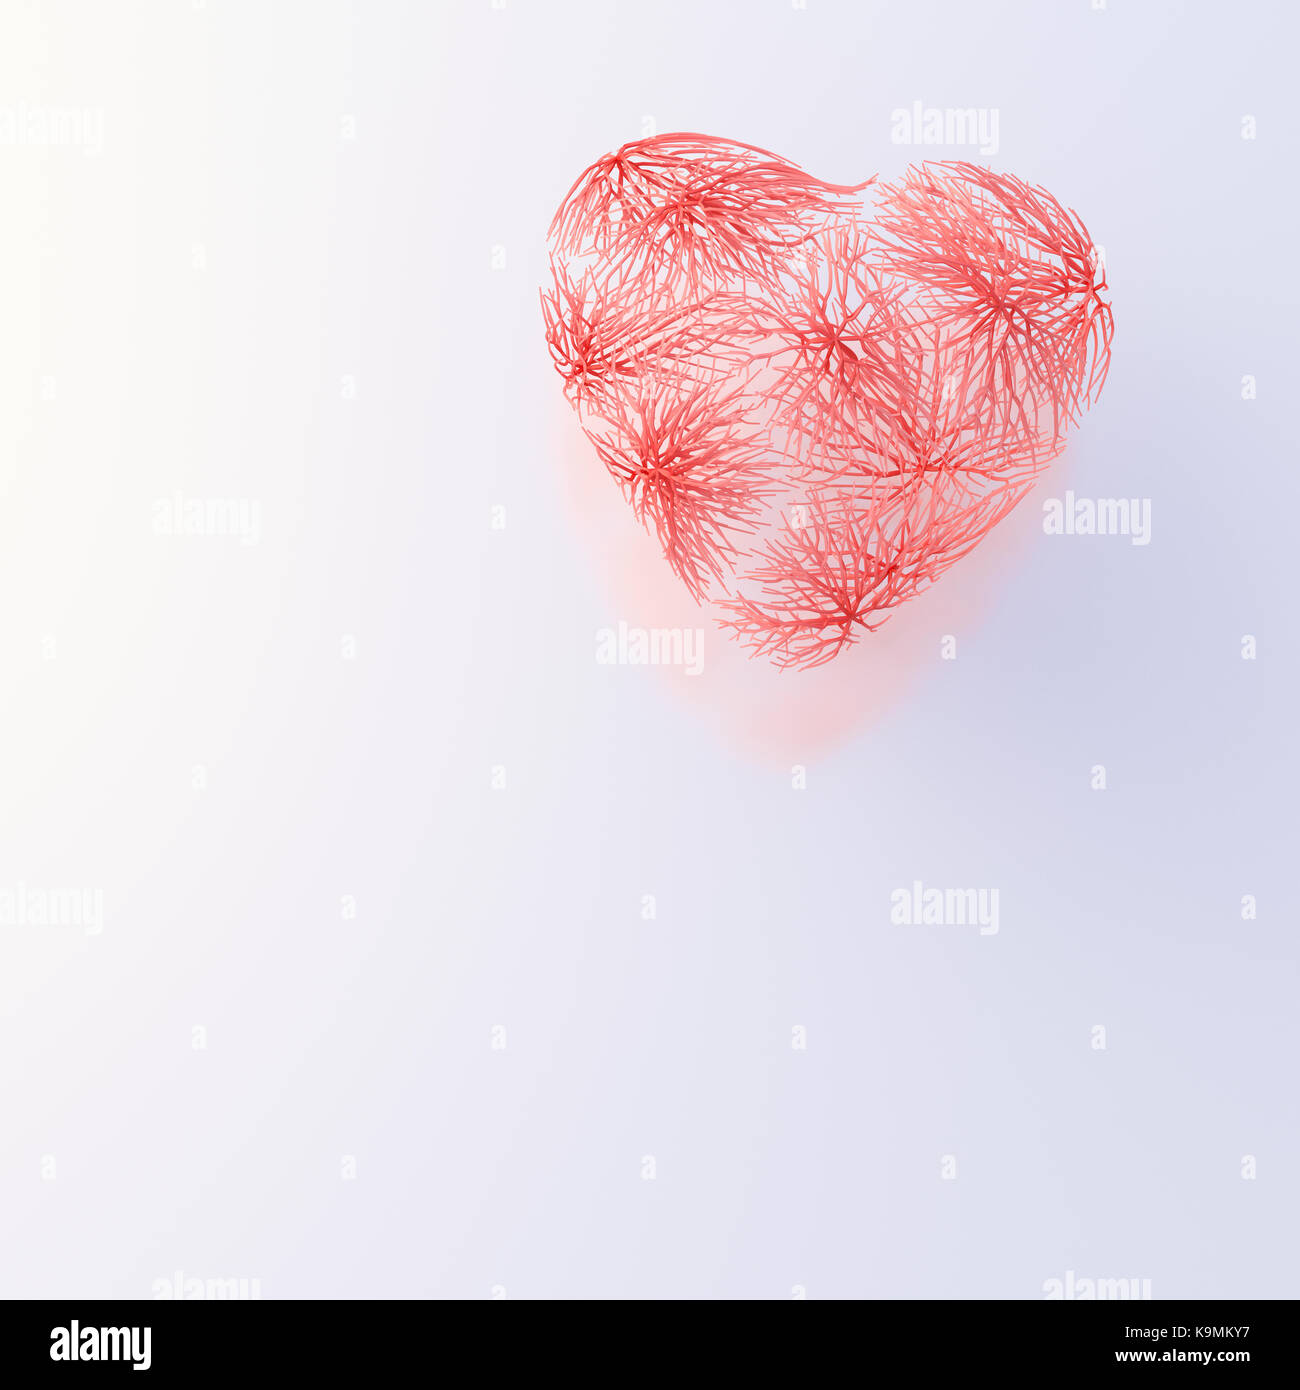 Heart with red veins Stock Photo